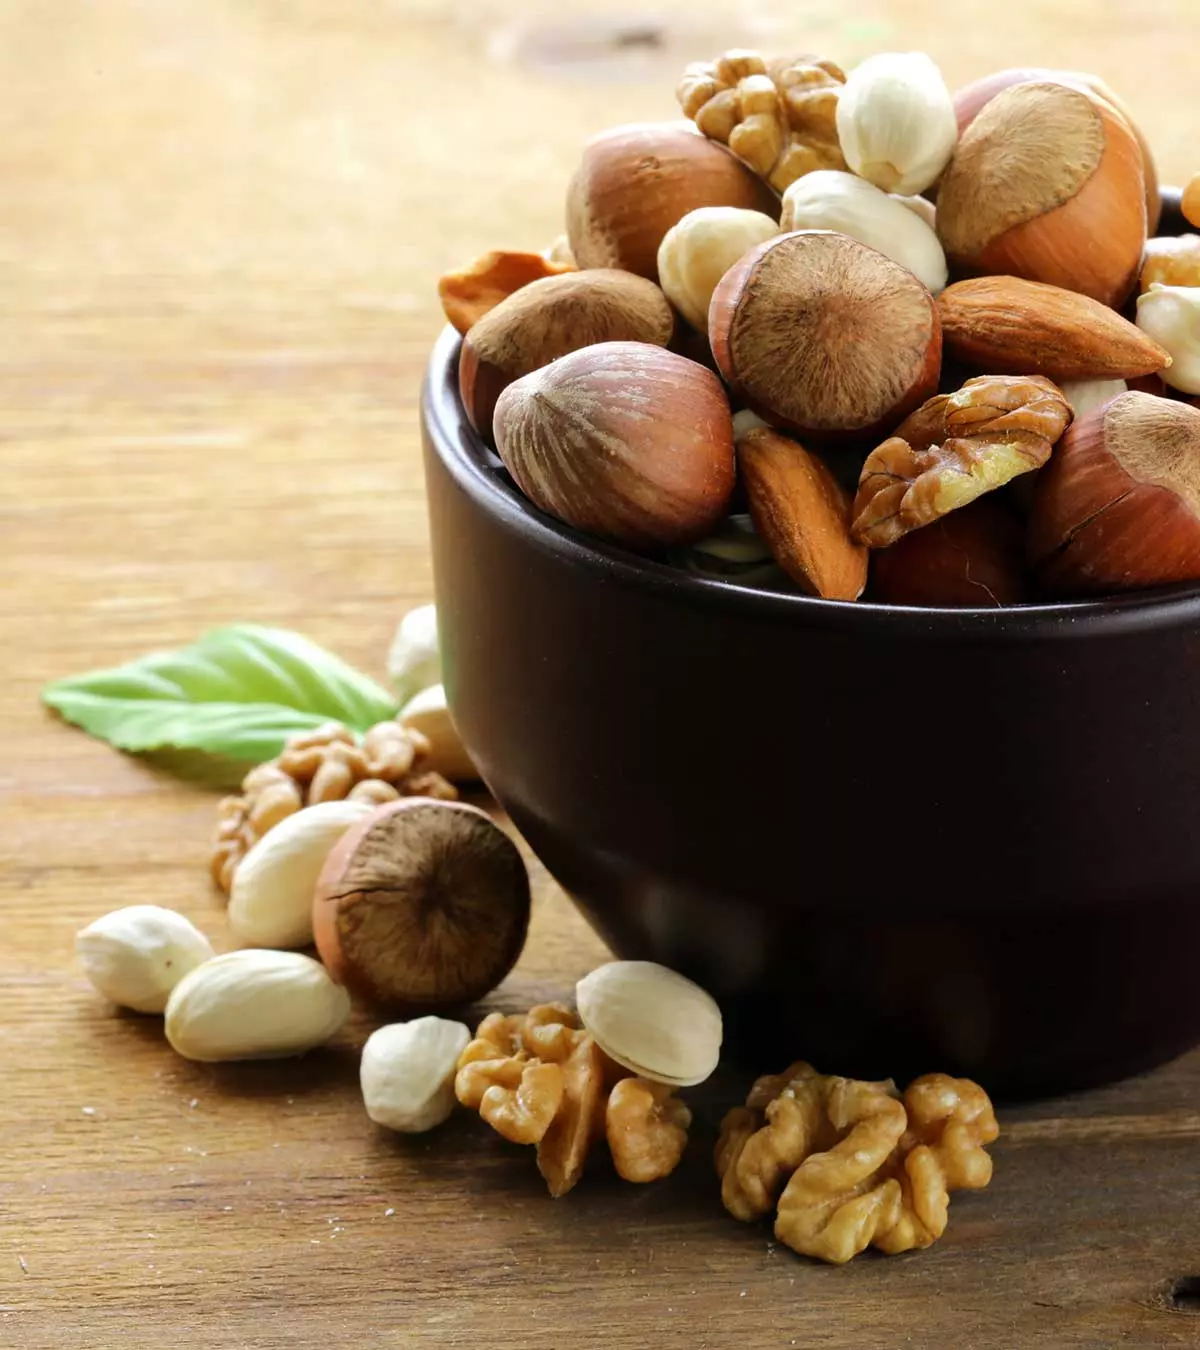 Is-It-Safe-To-Eat-Nuts-During-Breastfeeding